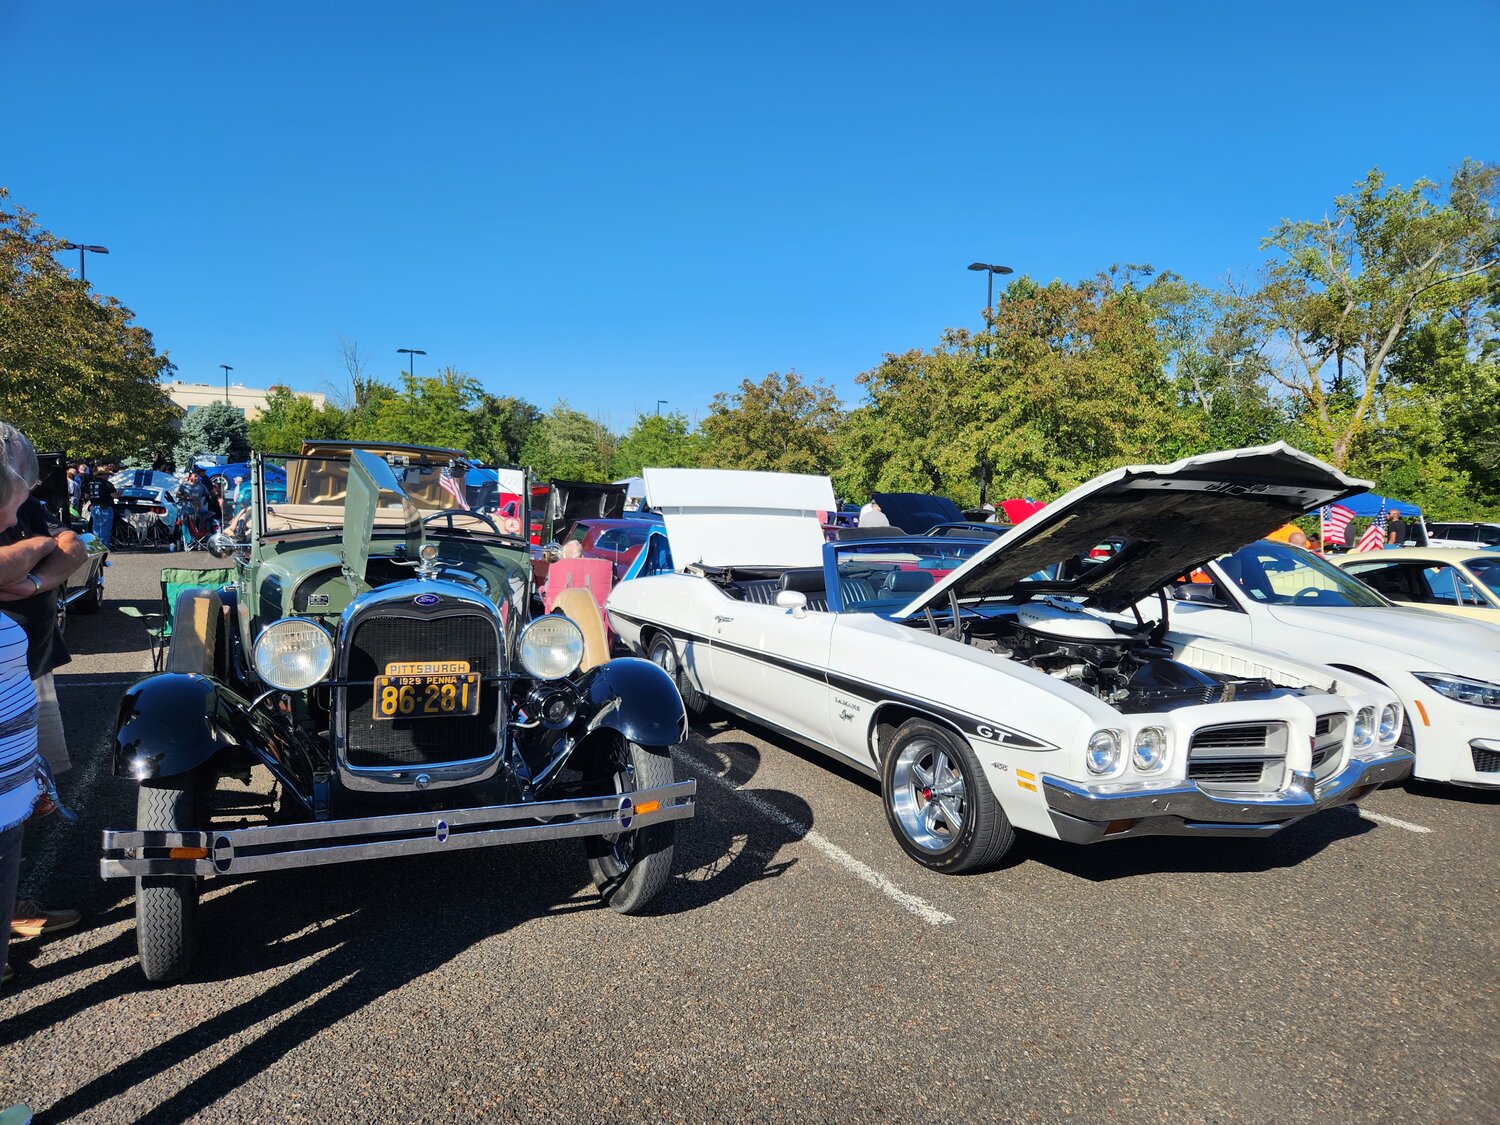 Some of the classic cars on display at the Kruisin’ with K9s Car Show.